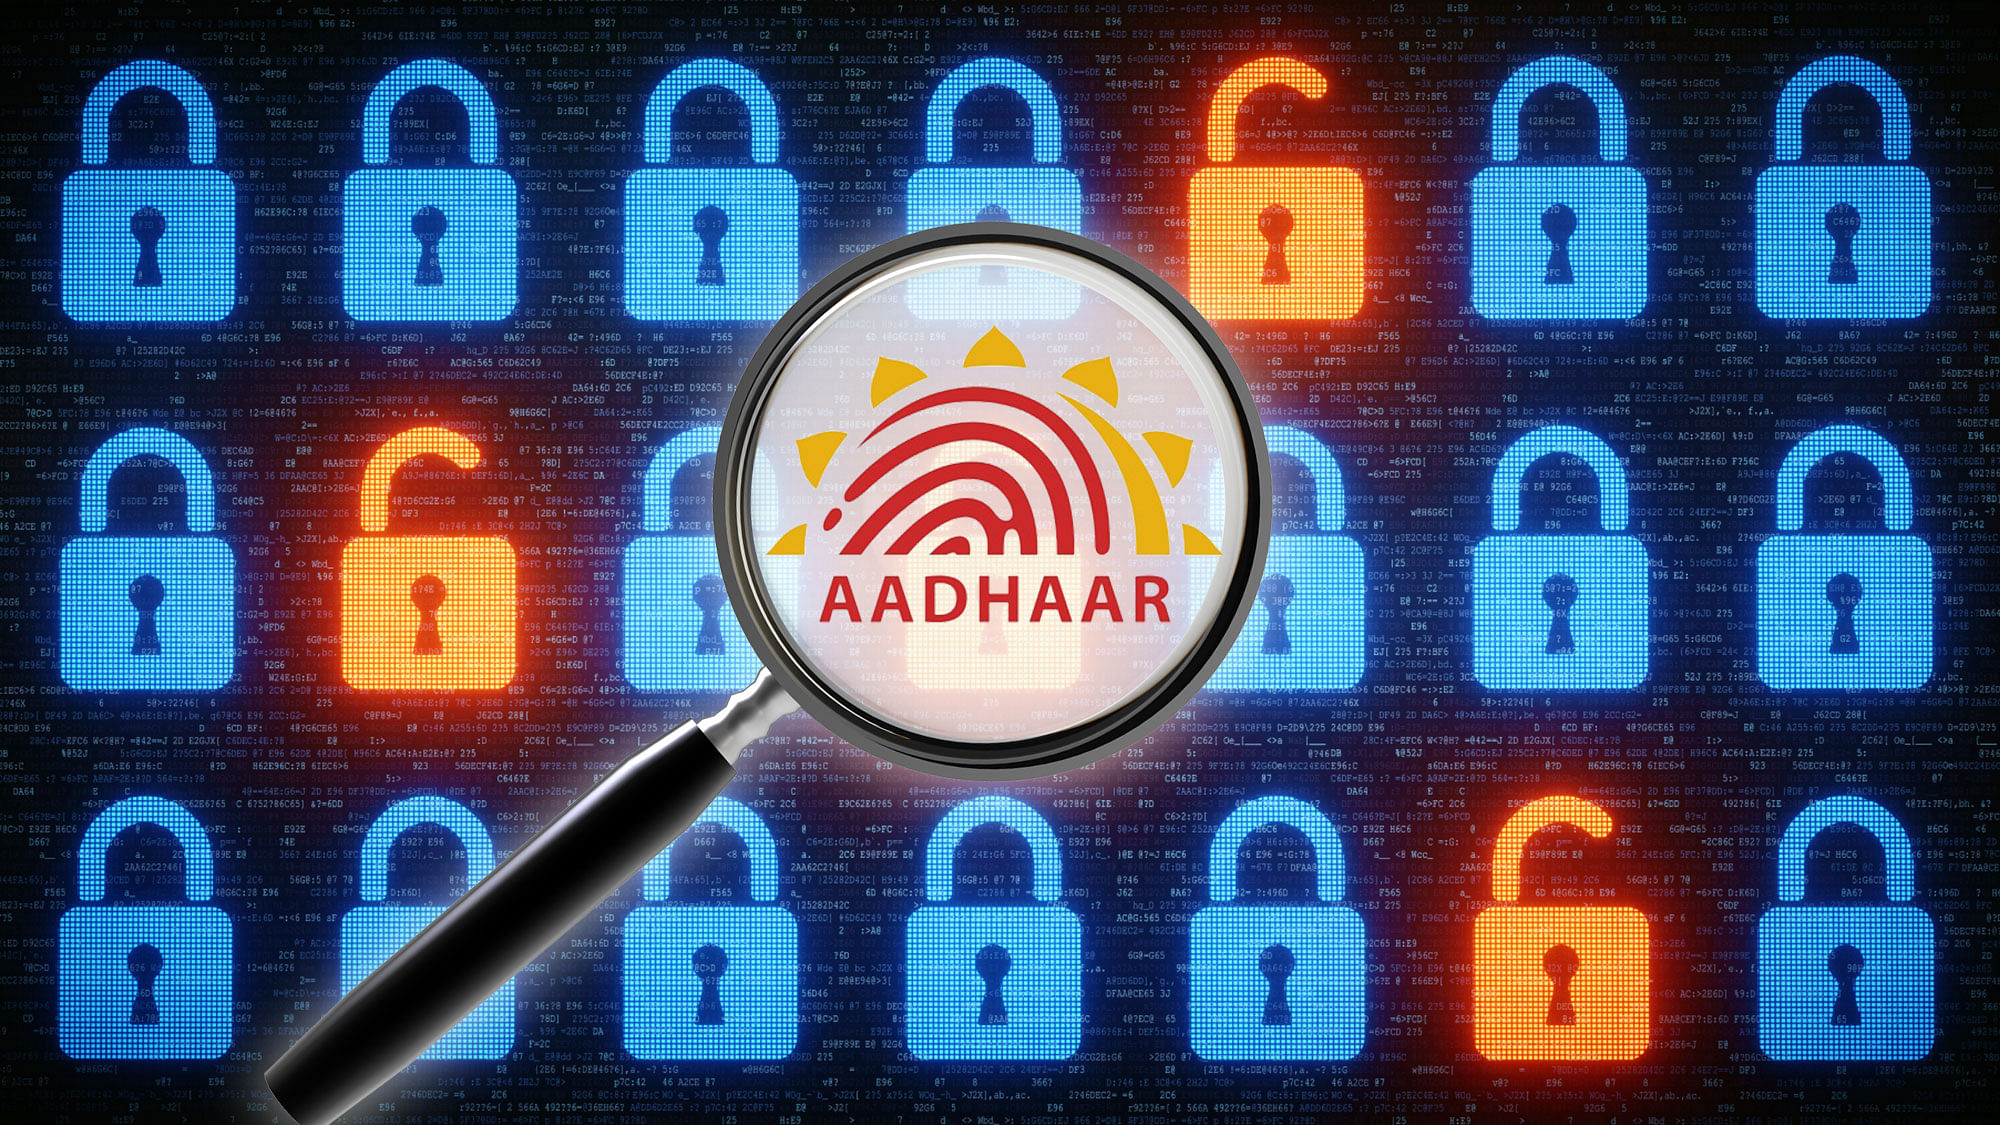 VID will be a temporary, revocable 16-digit random number mapped with the Aadhaar number.